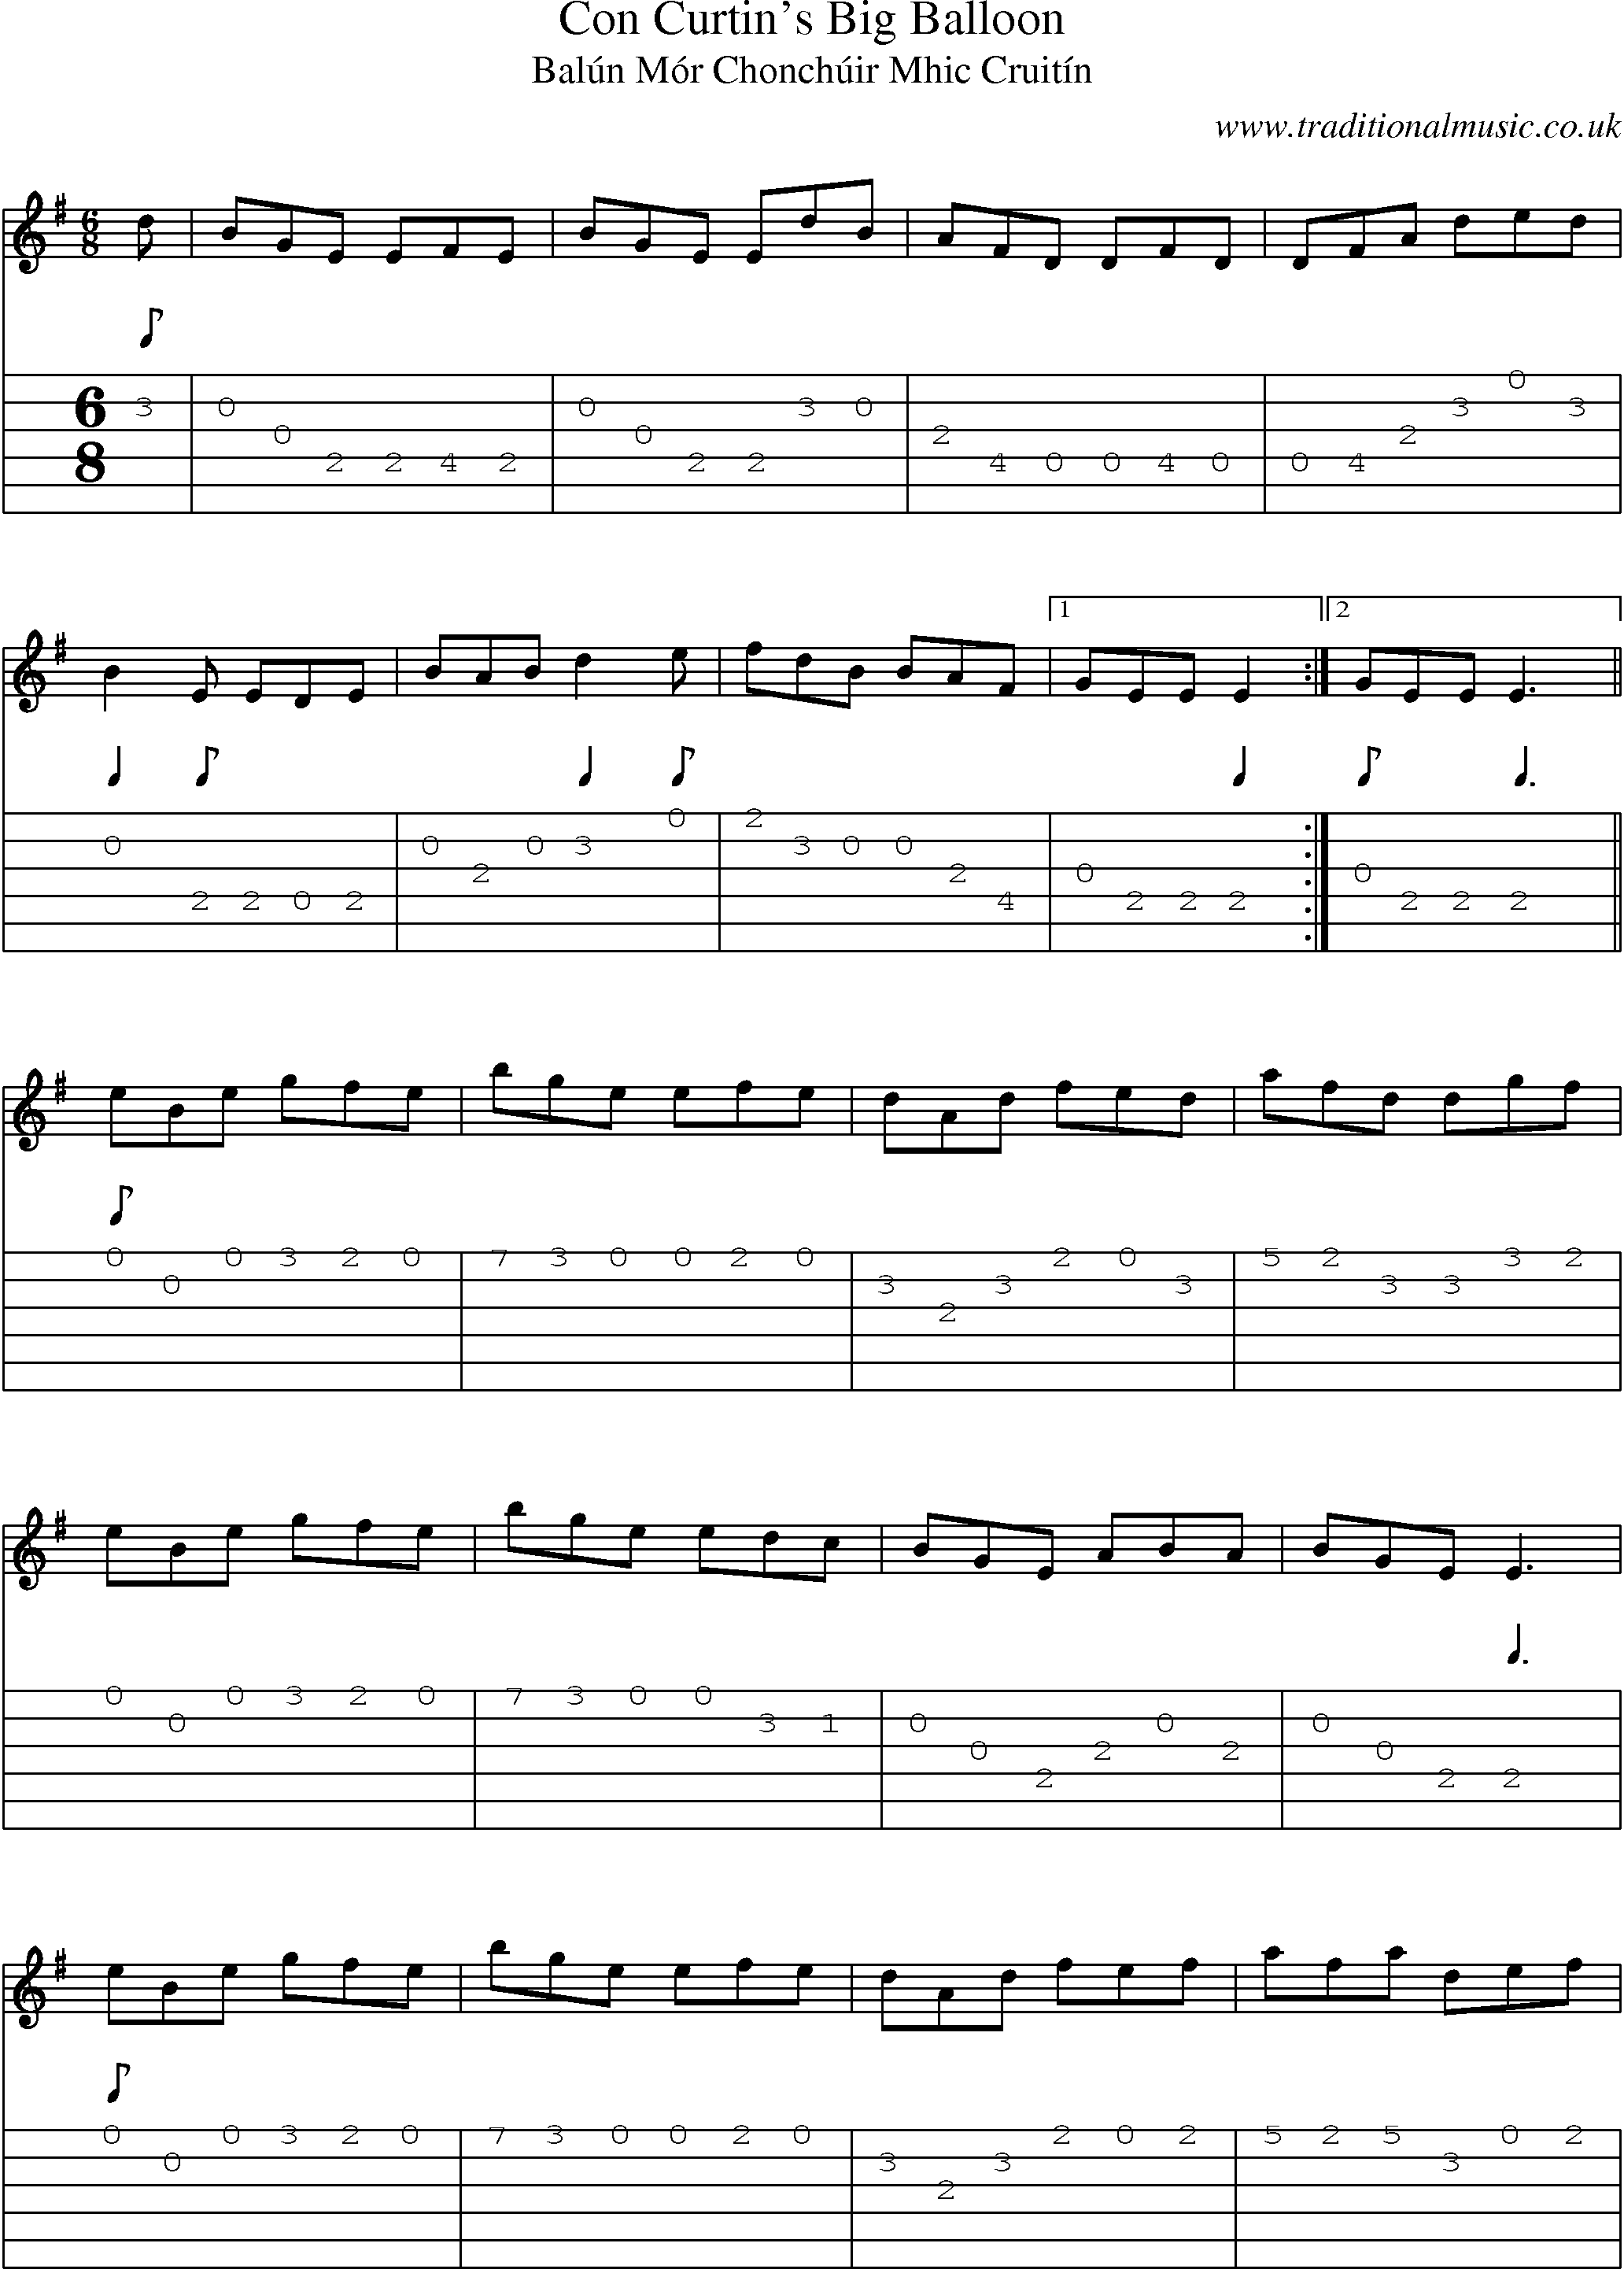 Music Score and Guitar Tabs for Con Curtins Big Balloon